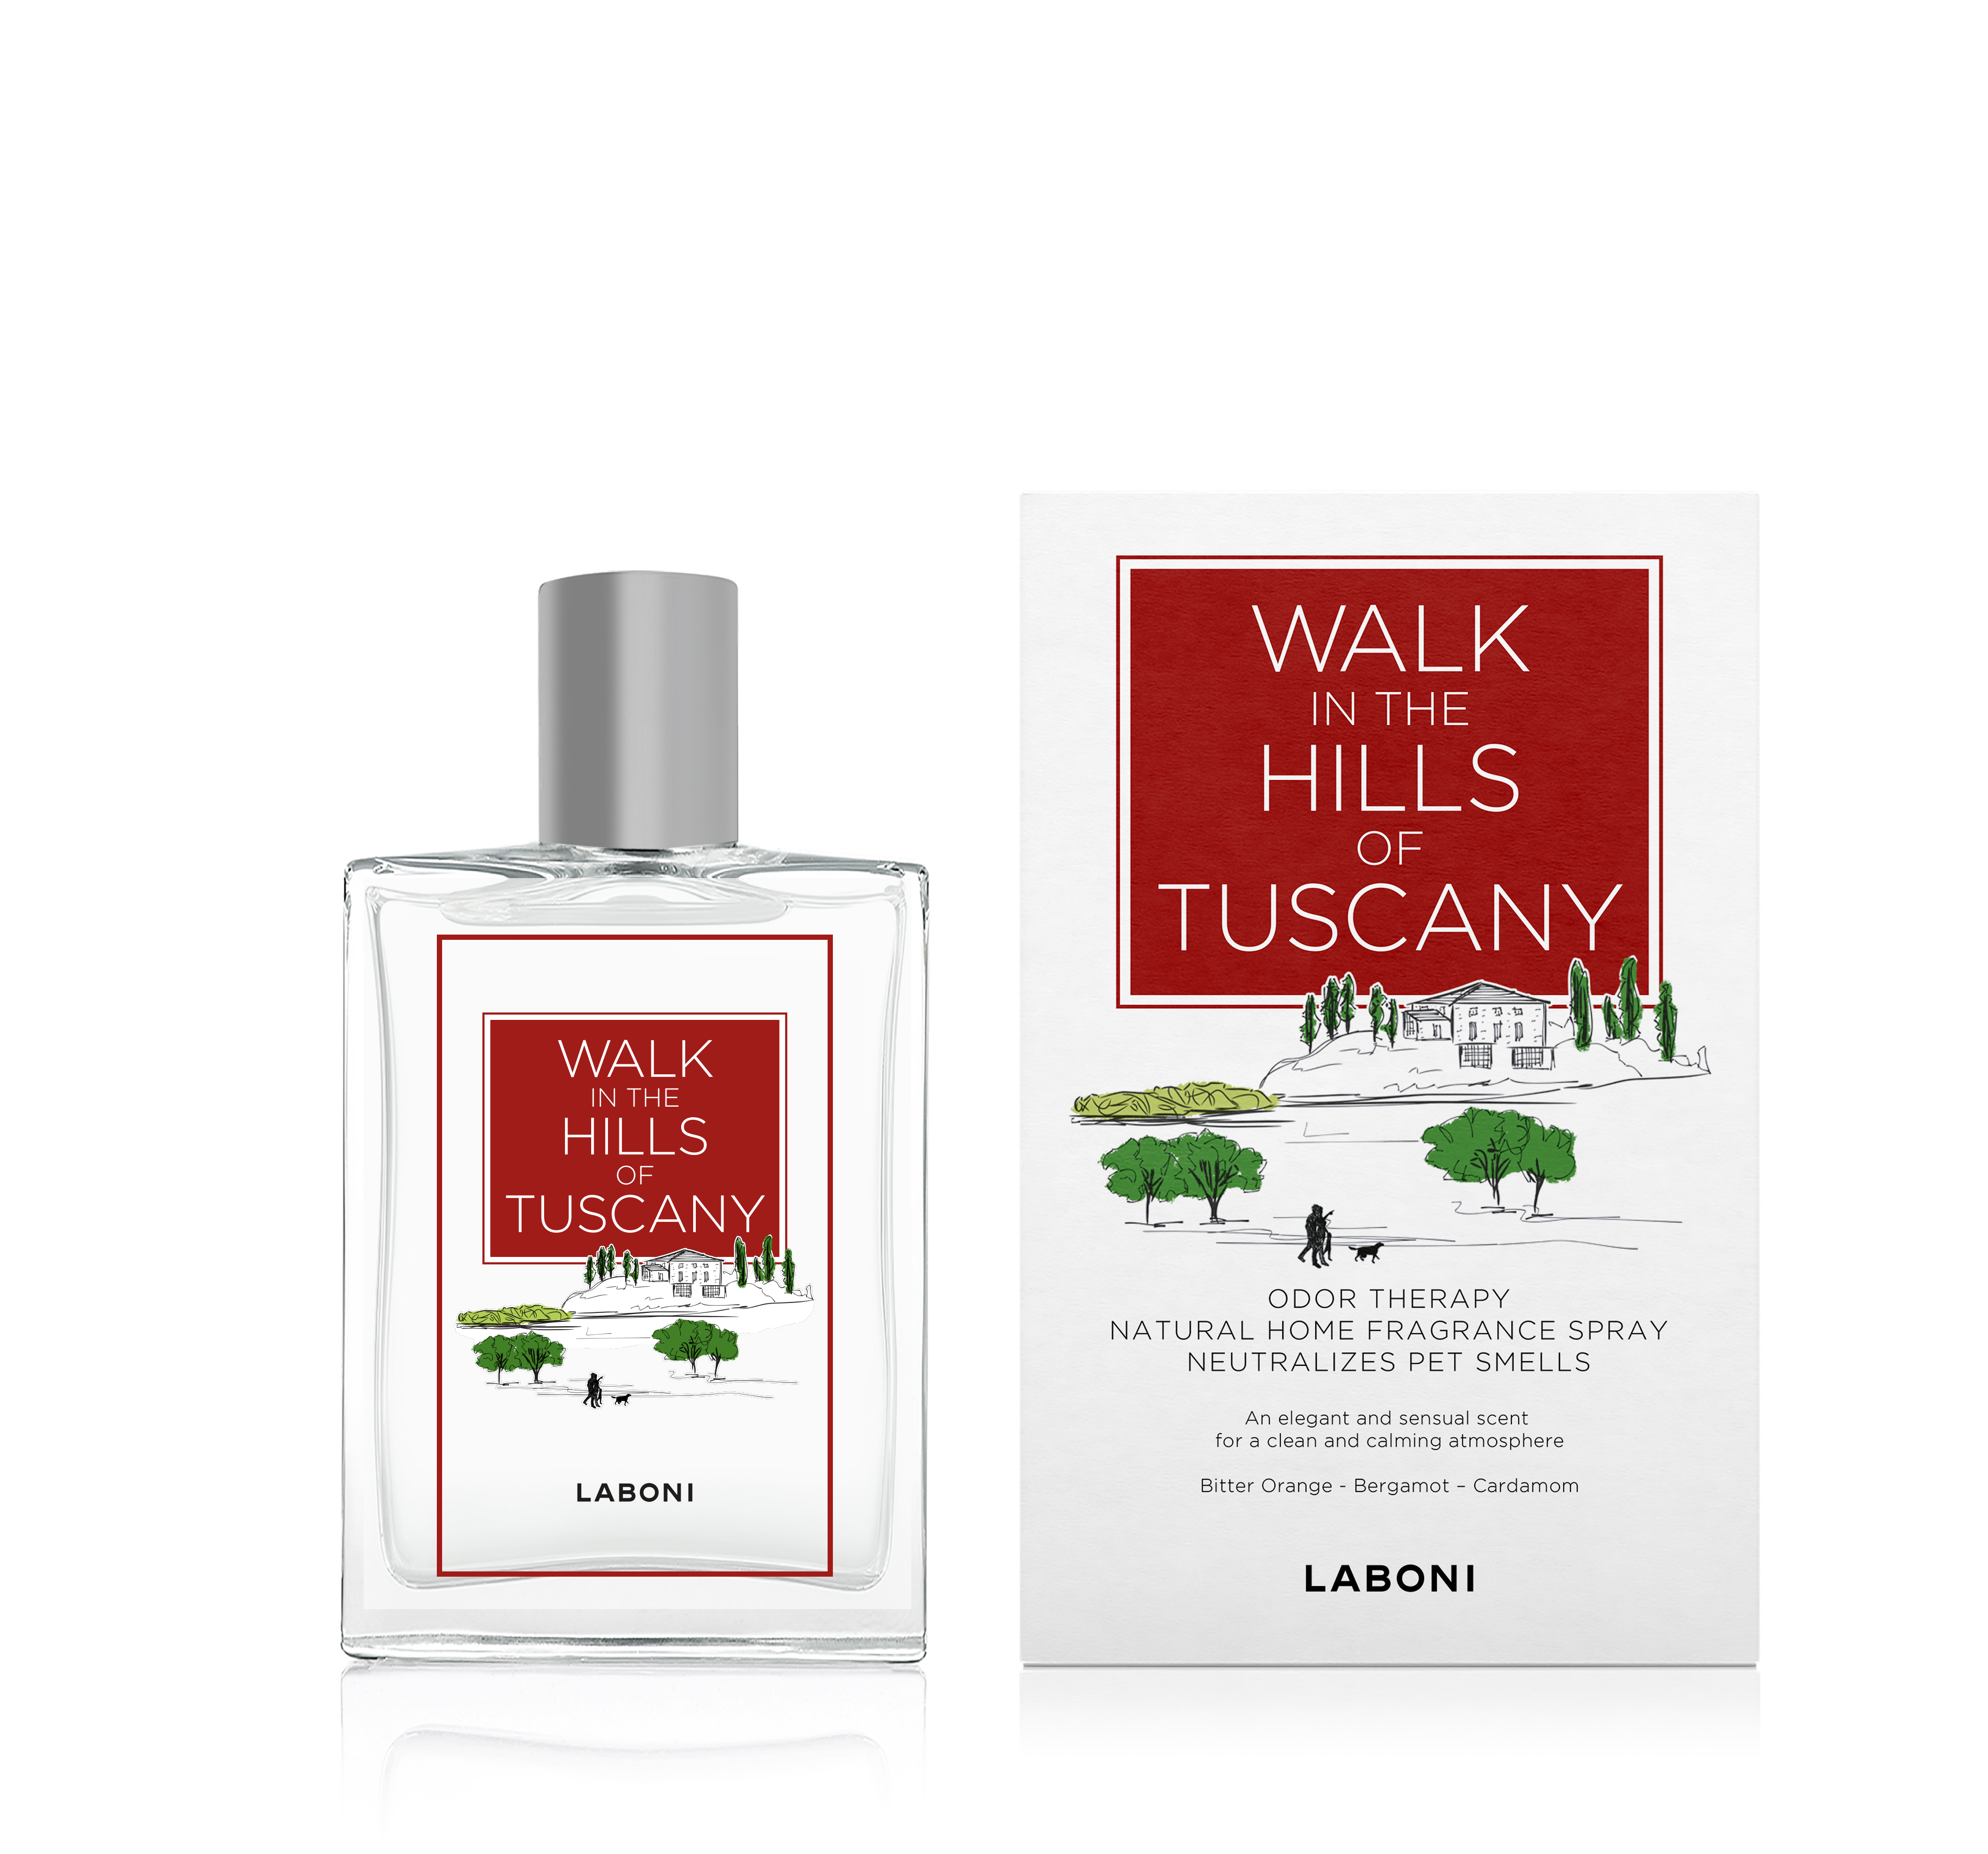 Laboni Duft-Spray Walk in the Hills of Tuscany rot 100ml